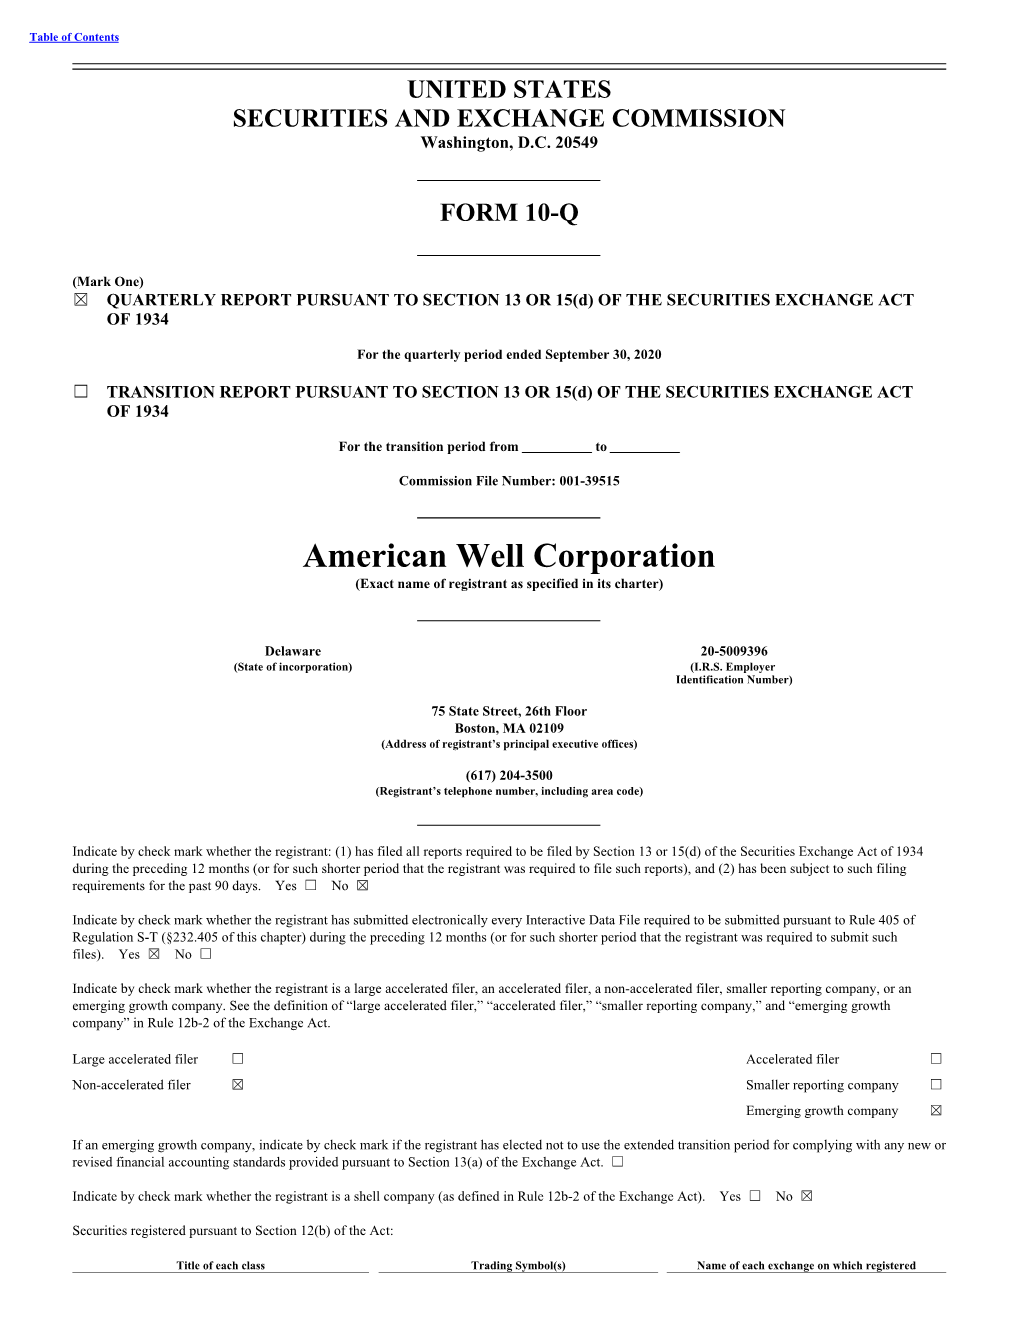 American Well Corporation (Exact Name of Registrant As Specified in Its Charter)